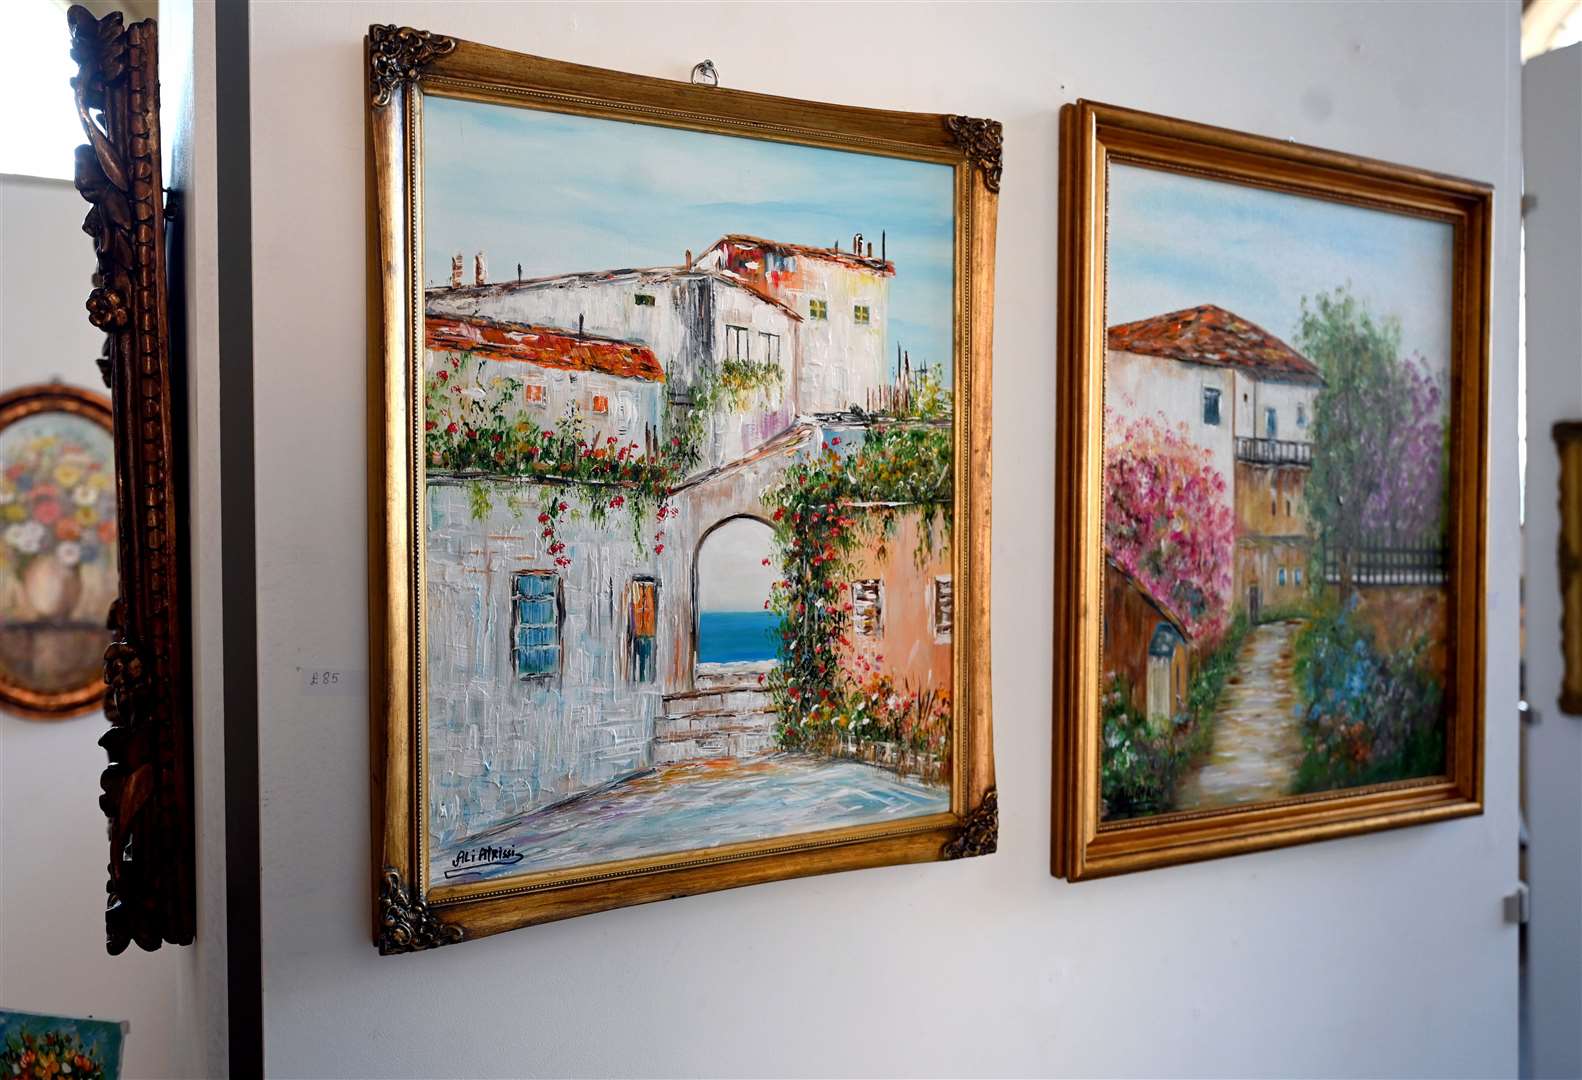 Two of the many paintings on display at the Custom House